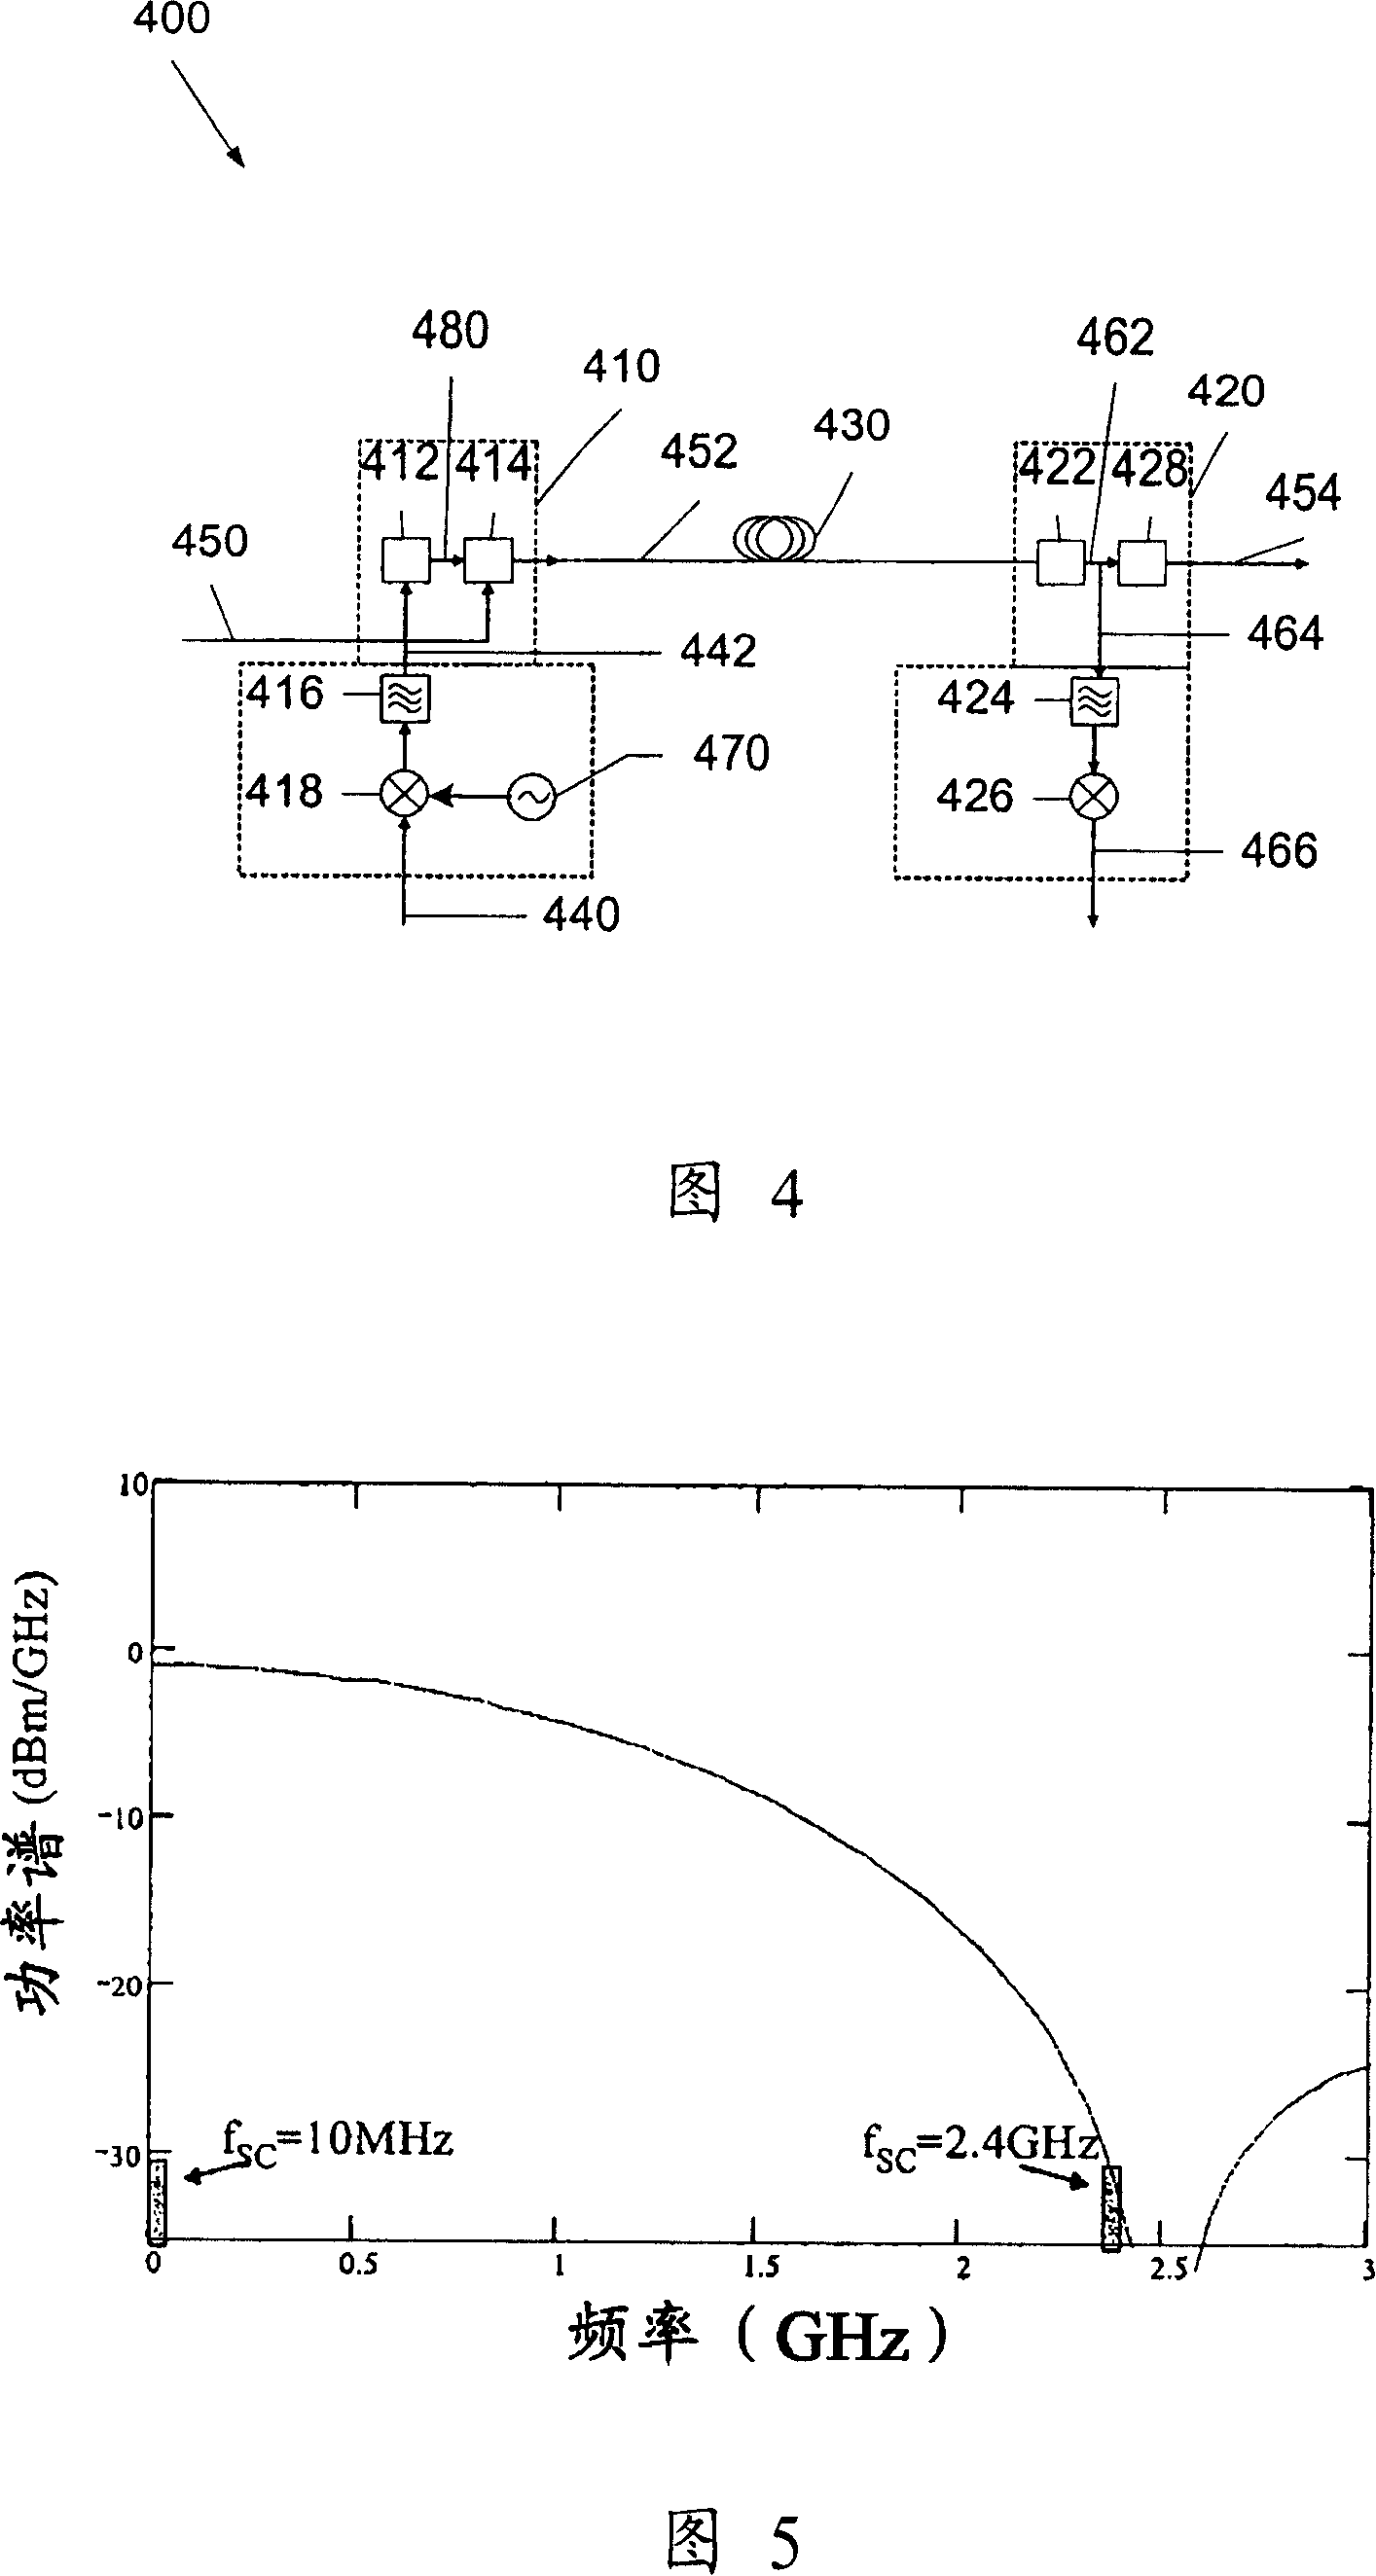 System and method for subcarrier modulation in ISM band as supervisory channel